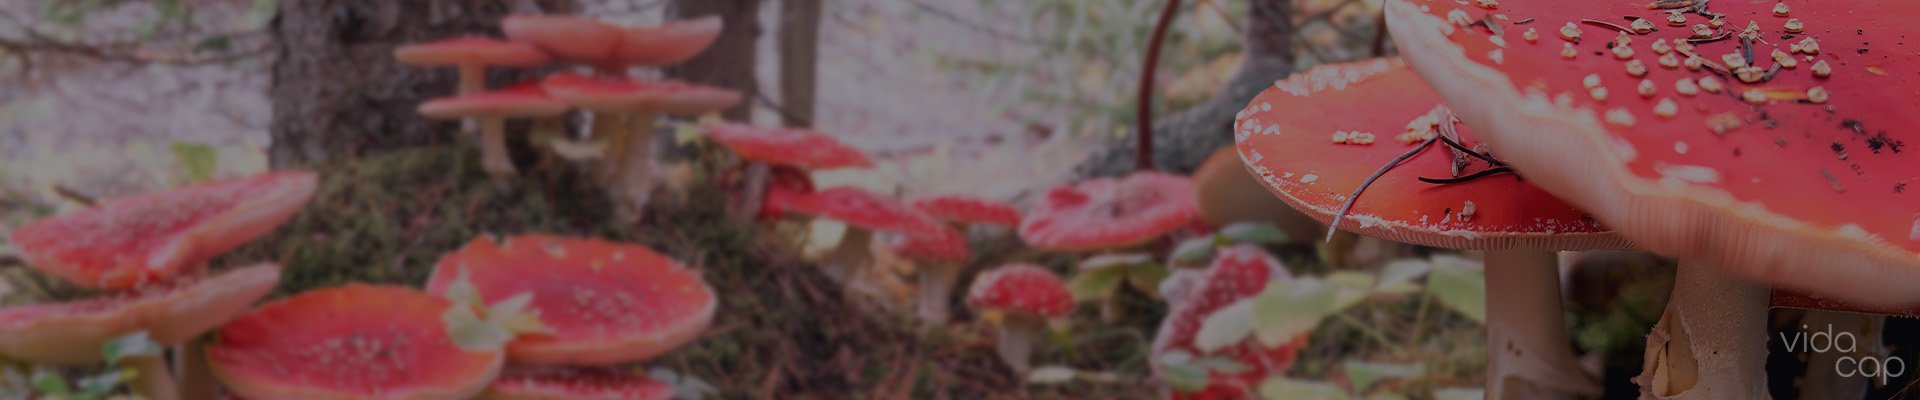 vc-banner-how_to_prepare_amanita_muscaria